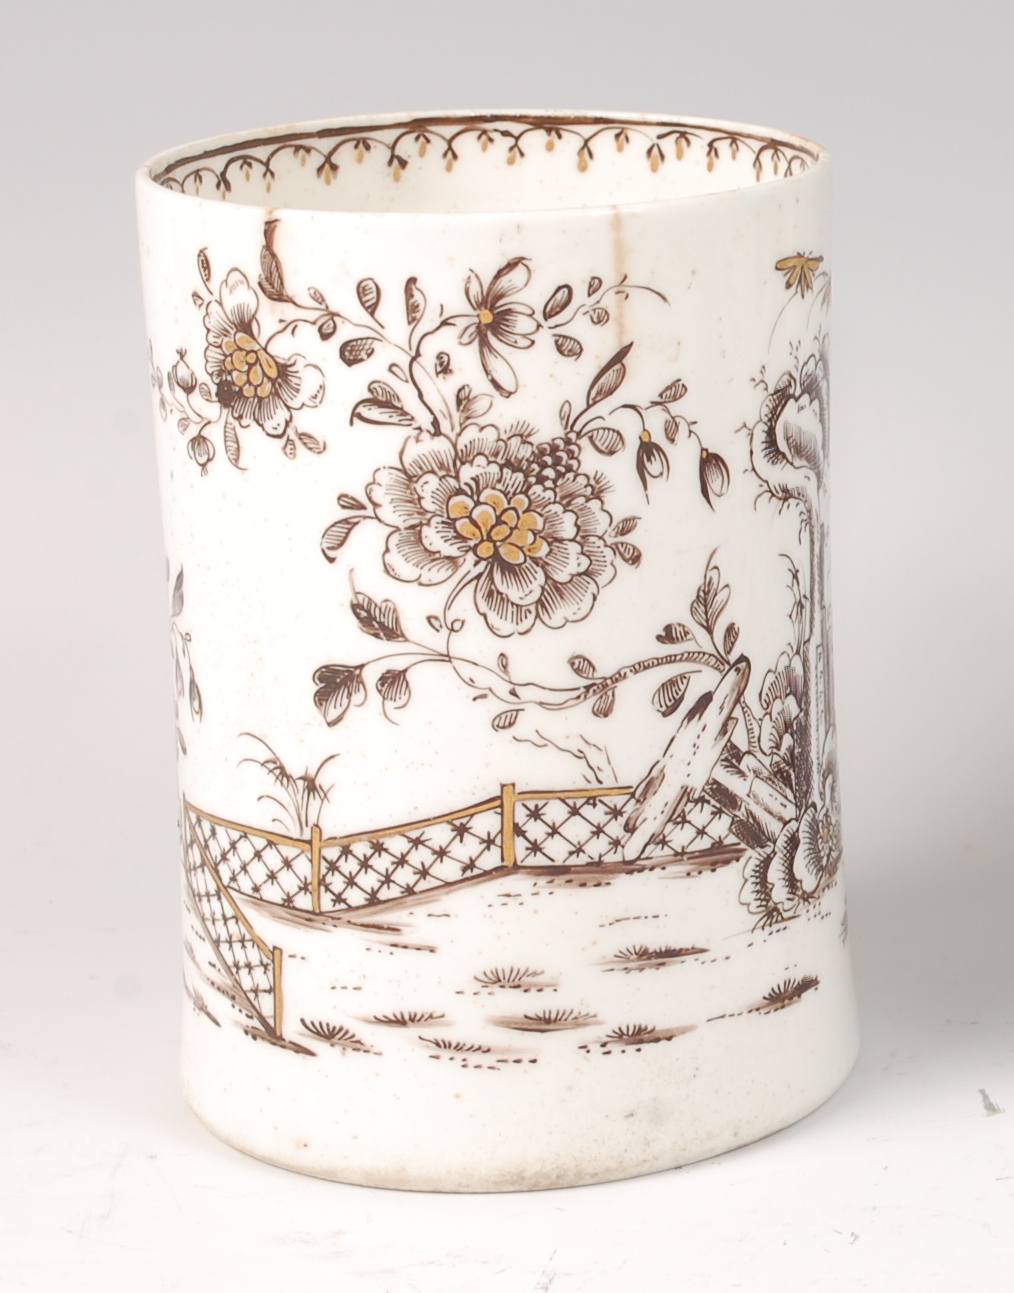 A Lowestoft porcelain tankard, circa 1770, with black pencil sepia and gilt highlighted decoration - Image 2 of 3